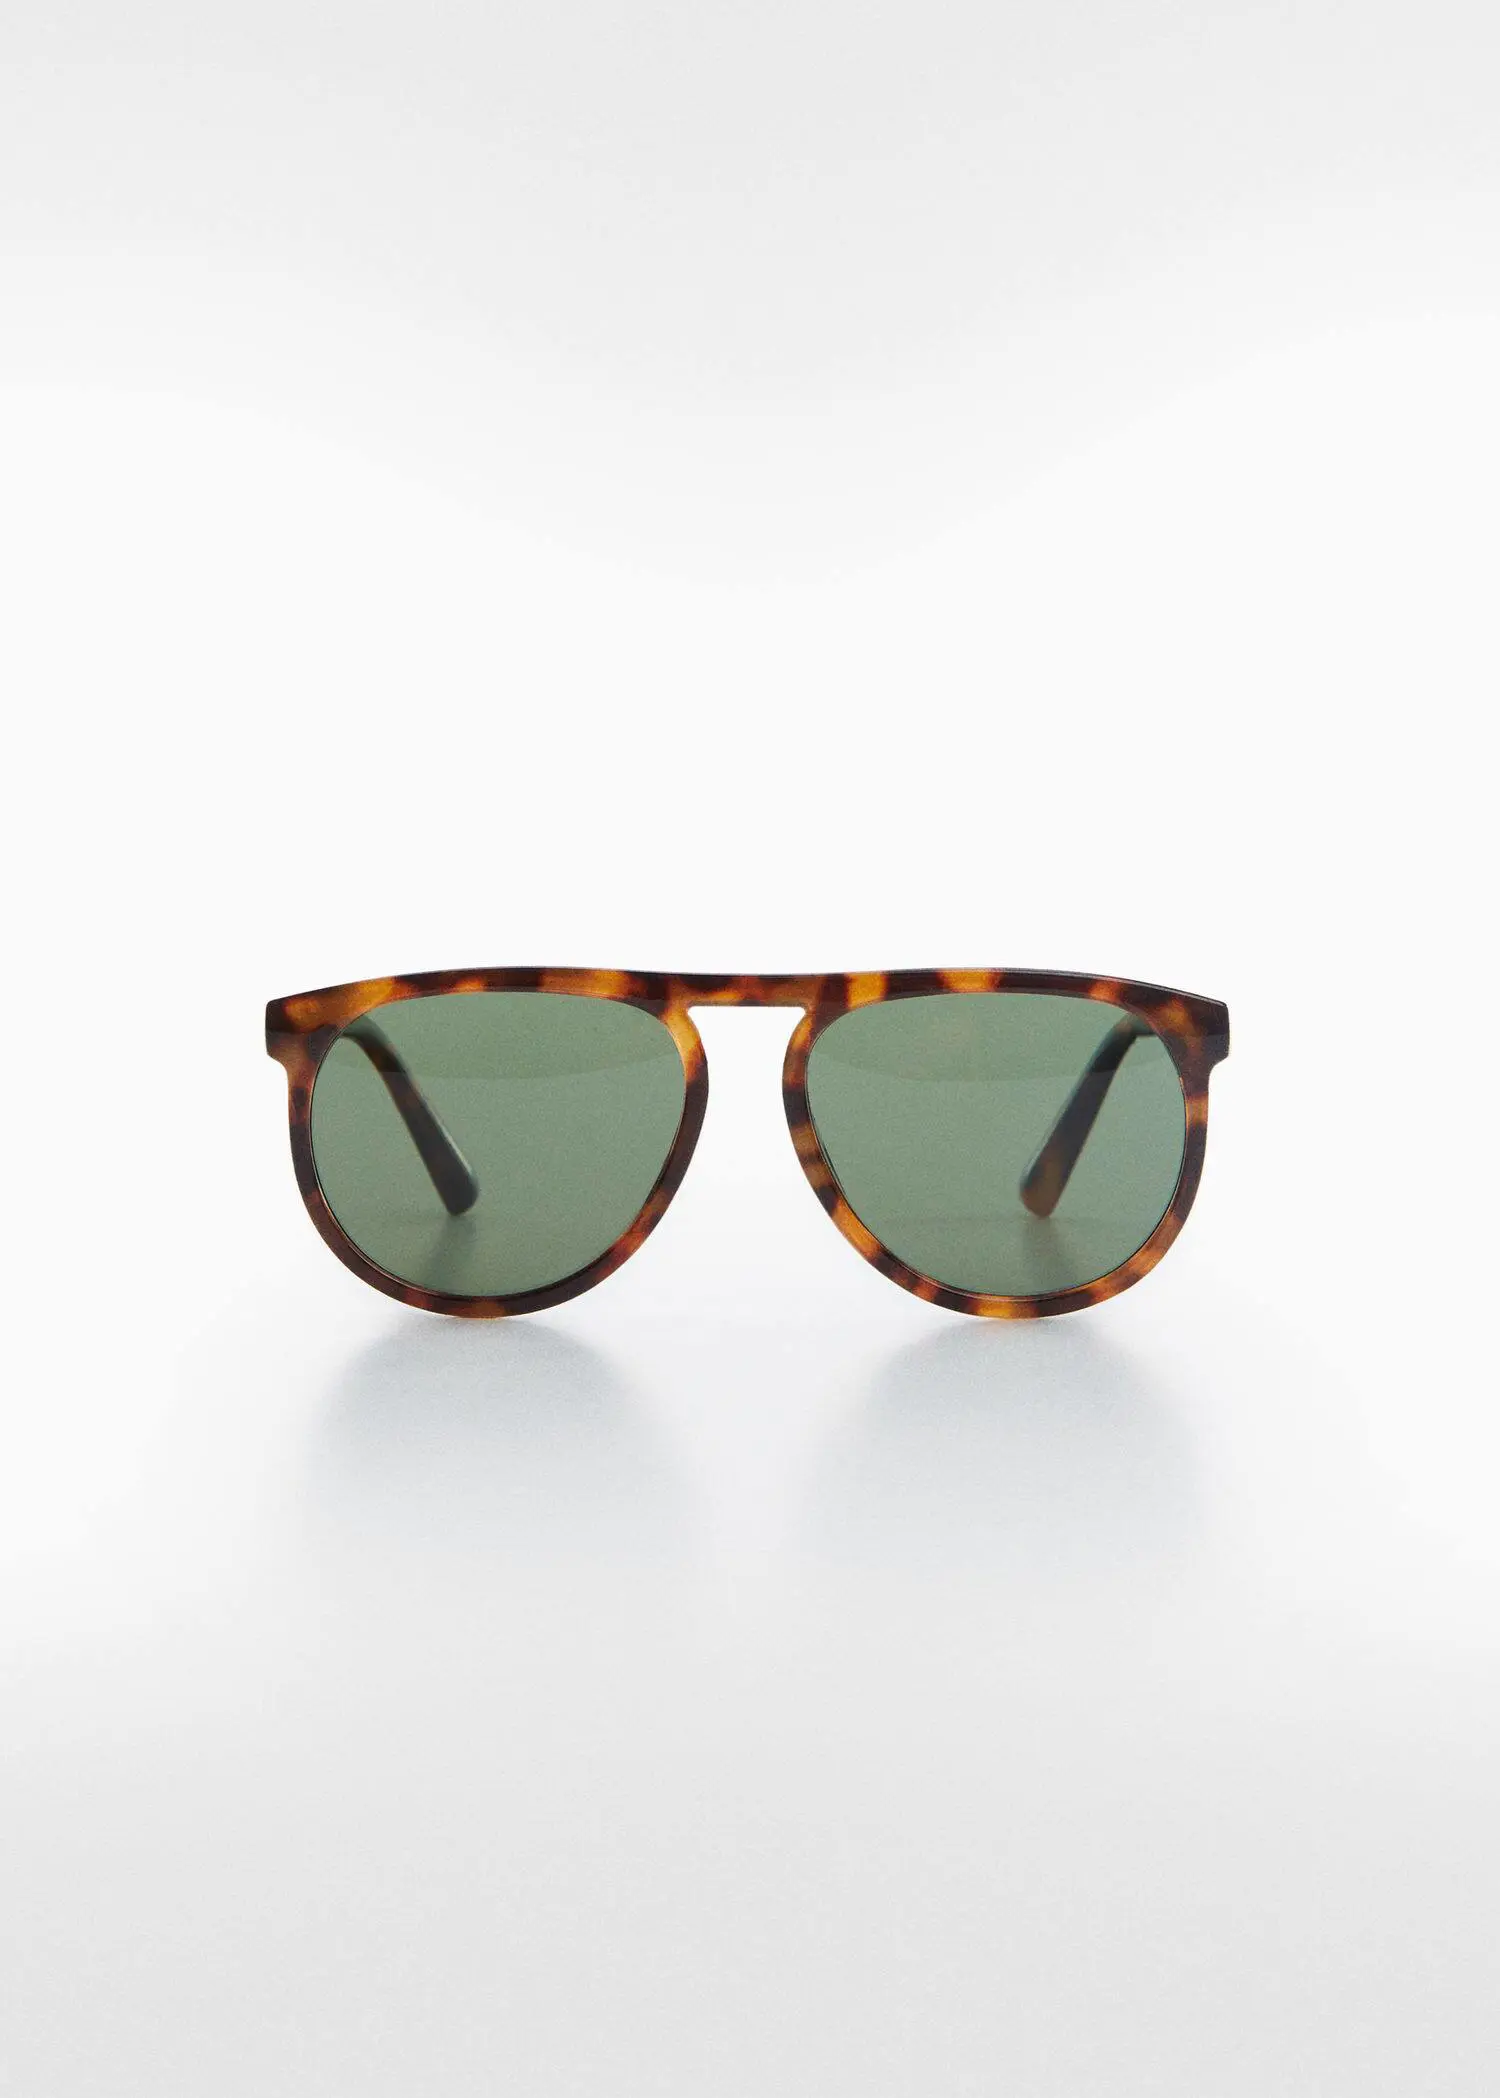 Mango Polarised sunglasses. a pair of sunglasses on top of a white surface. 